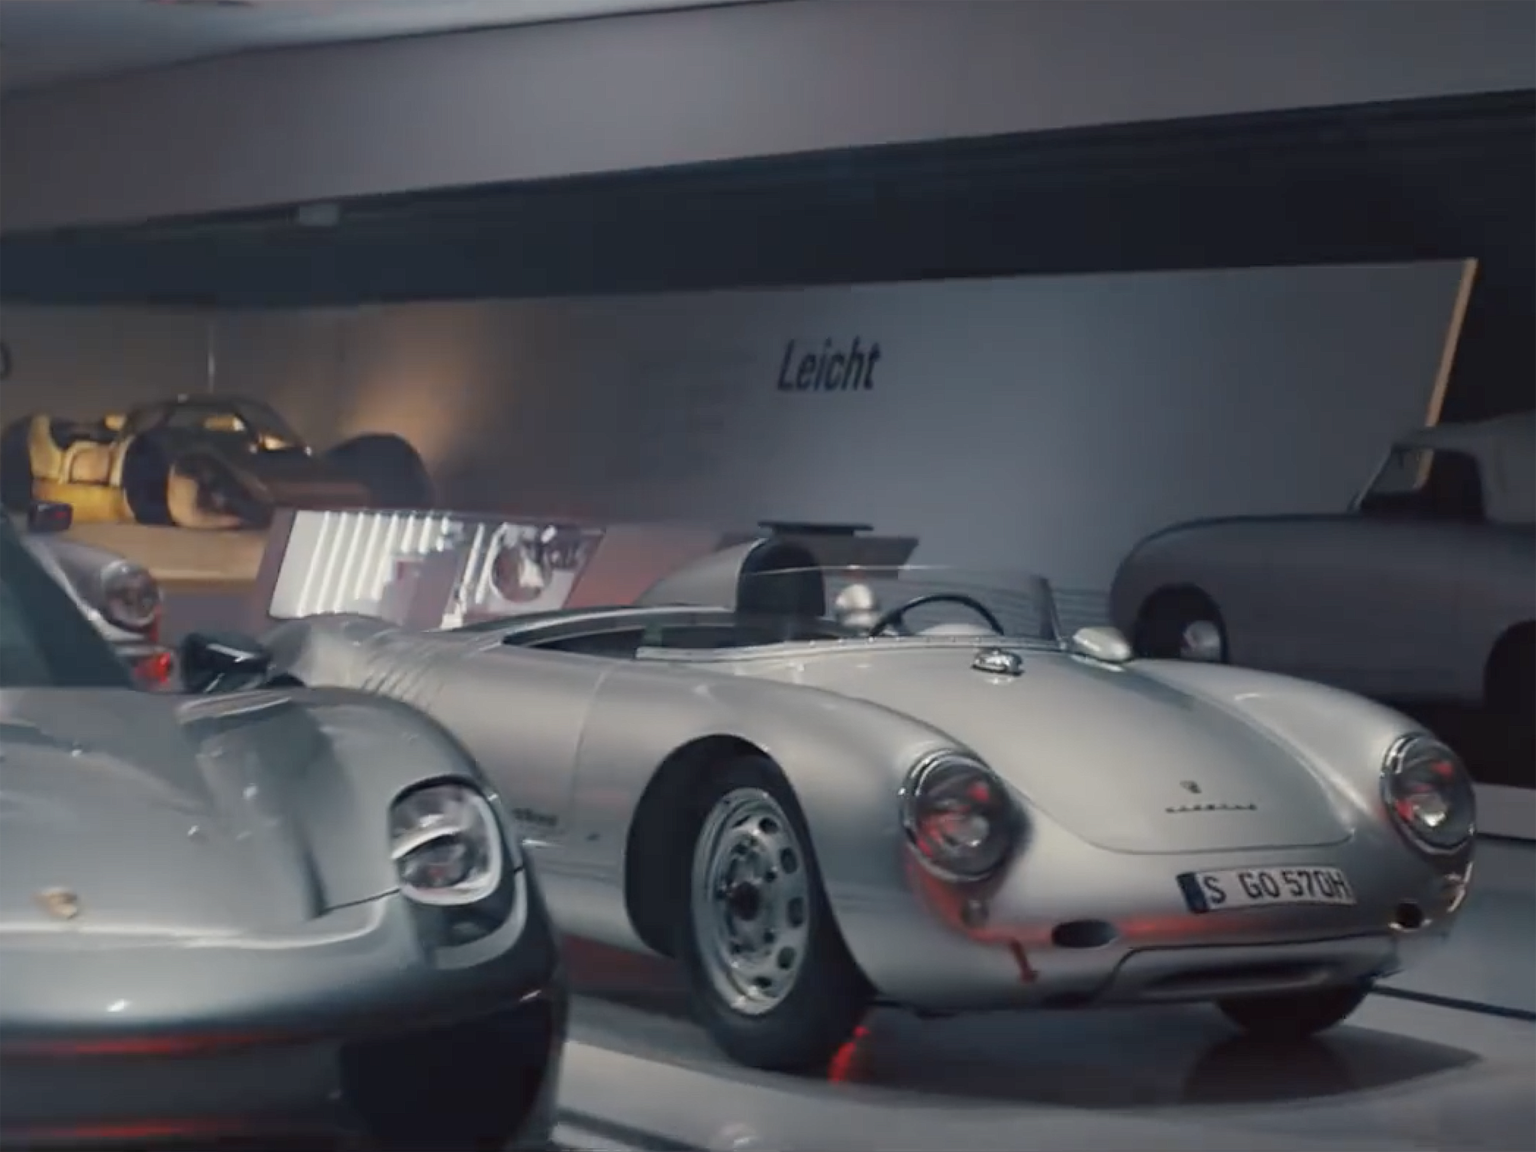 Porsche is returning to Super Bowl advertising after a 25-year hiatus.